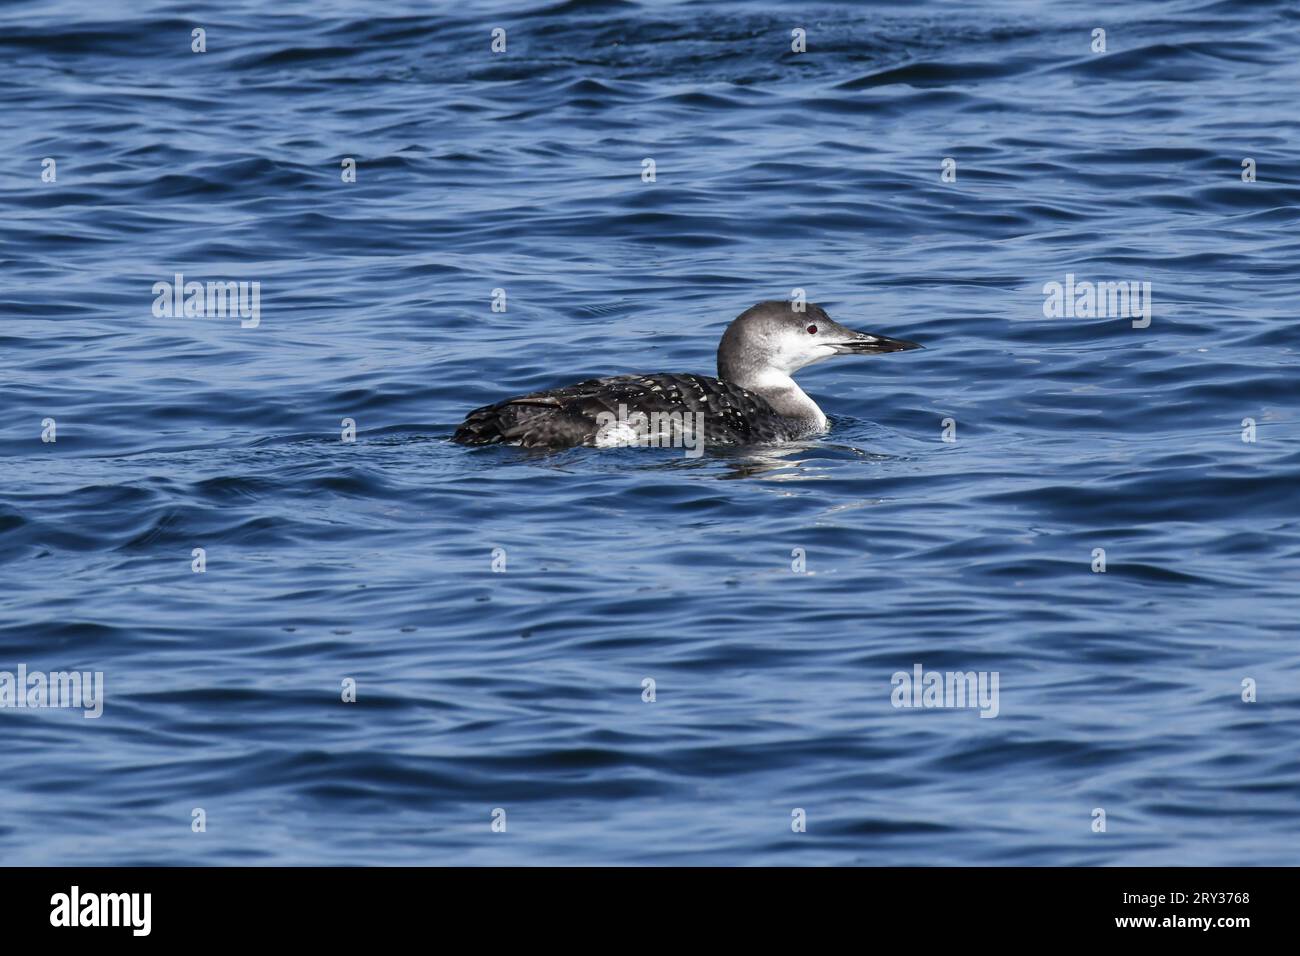 Young adolescent common Loon swimming along the blue lake water Stock Photo